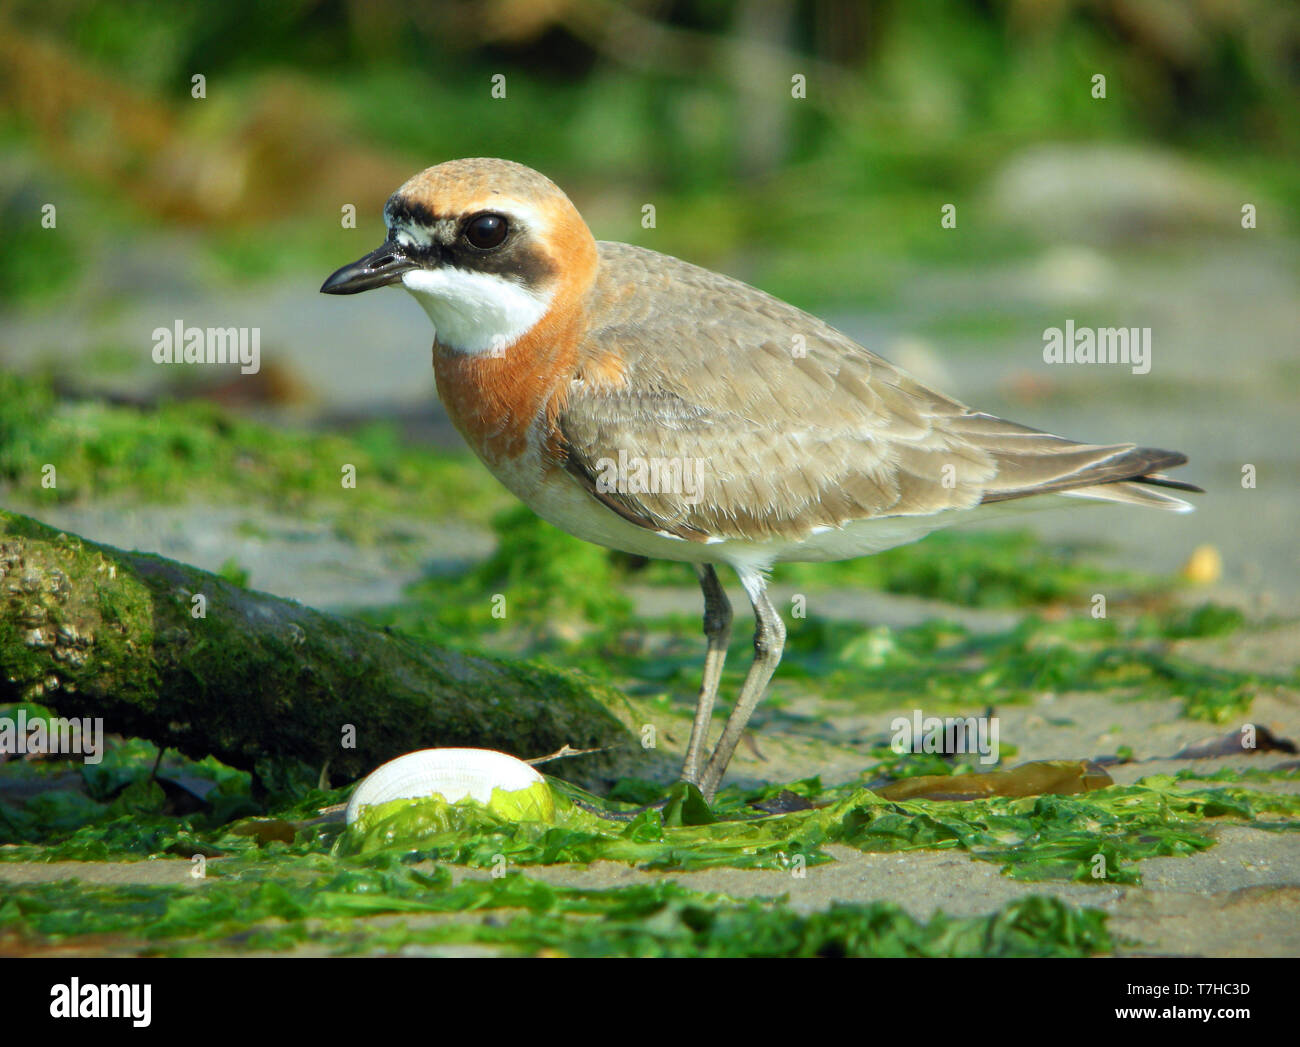 Mongolian Plover (Charadrius mongolus) at Heuksan do island, South Korea, during spring migration along the East Asian Flyway. Stock Photo